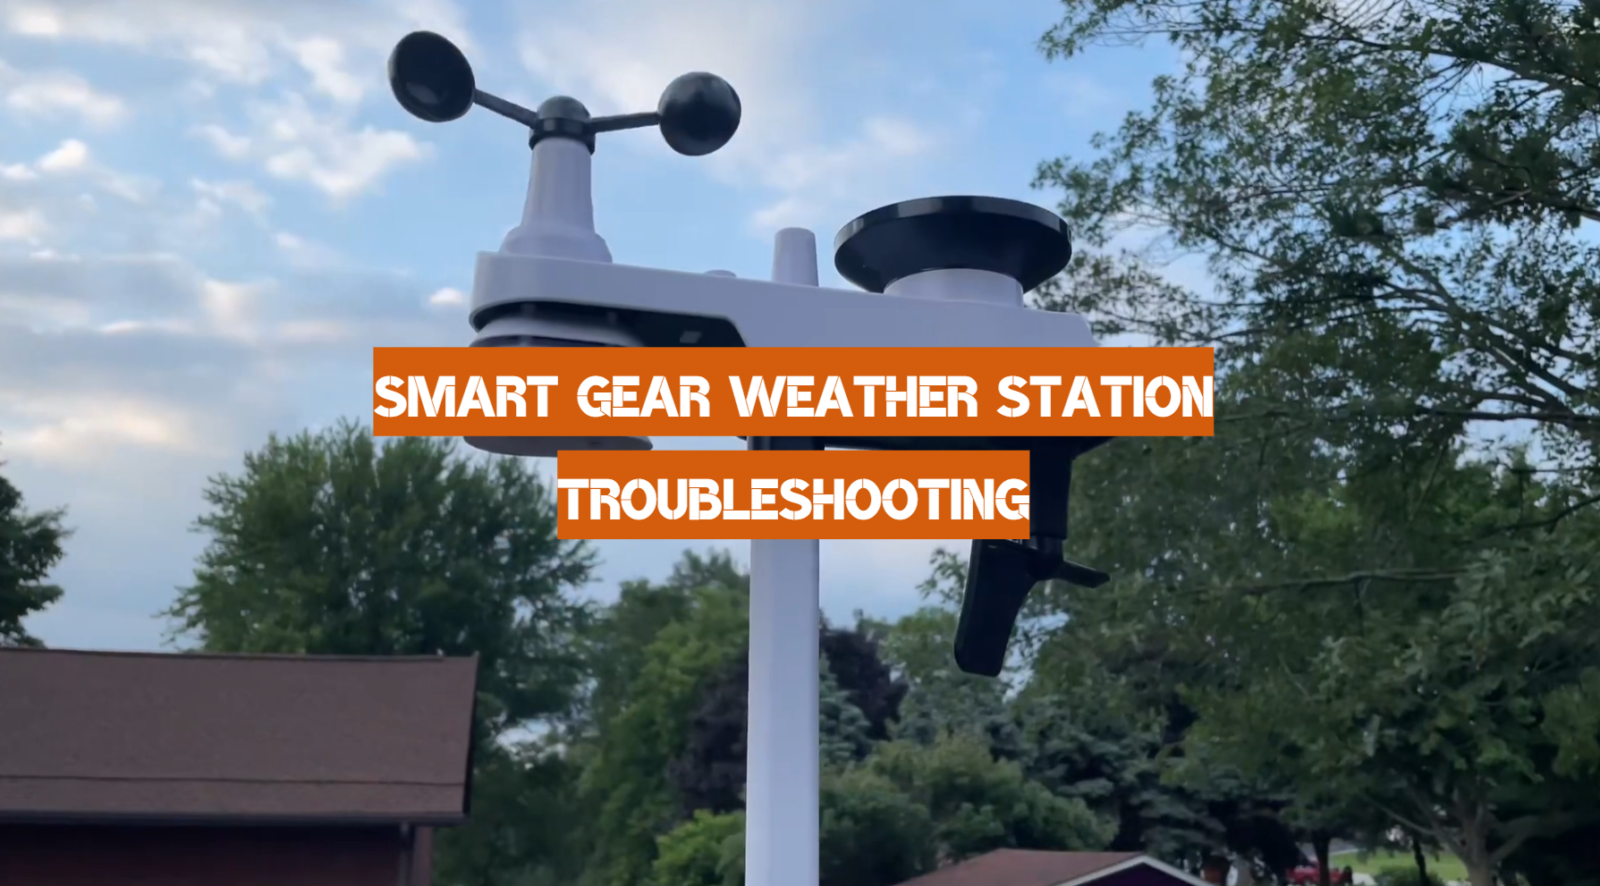 Smart Gear Weather Station Troubleshooting